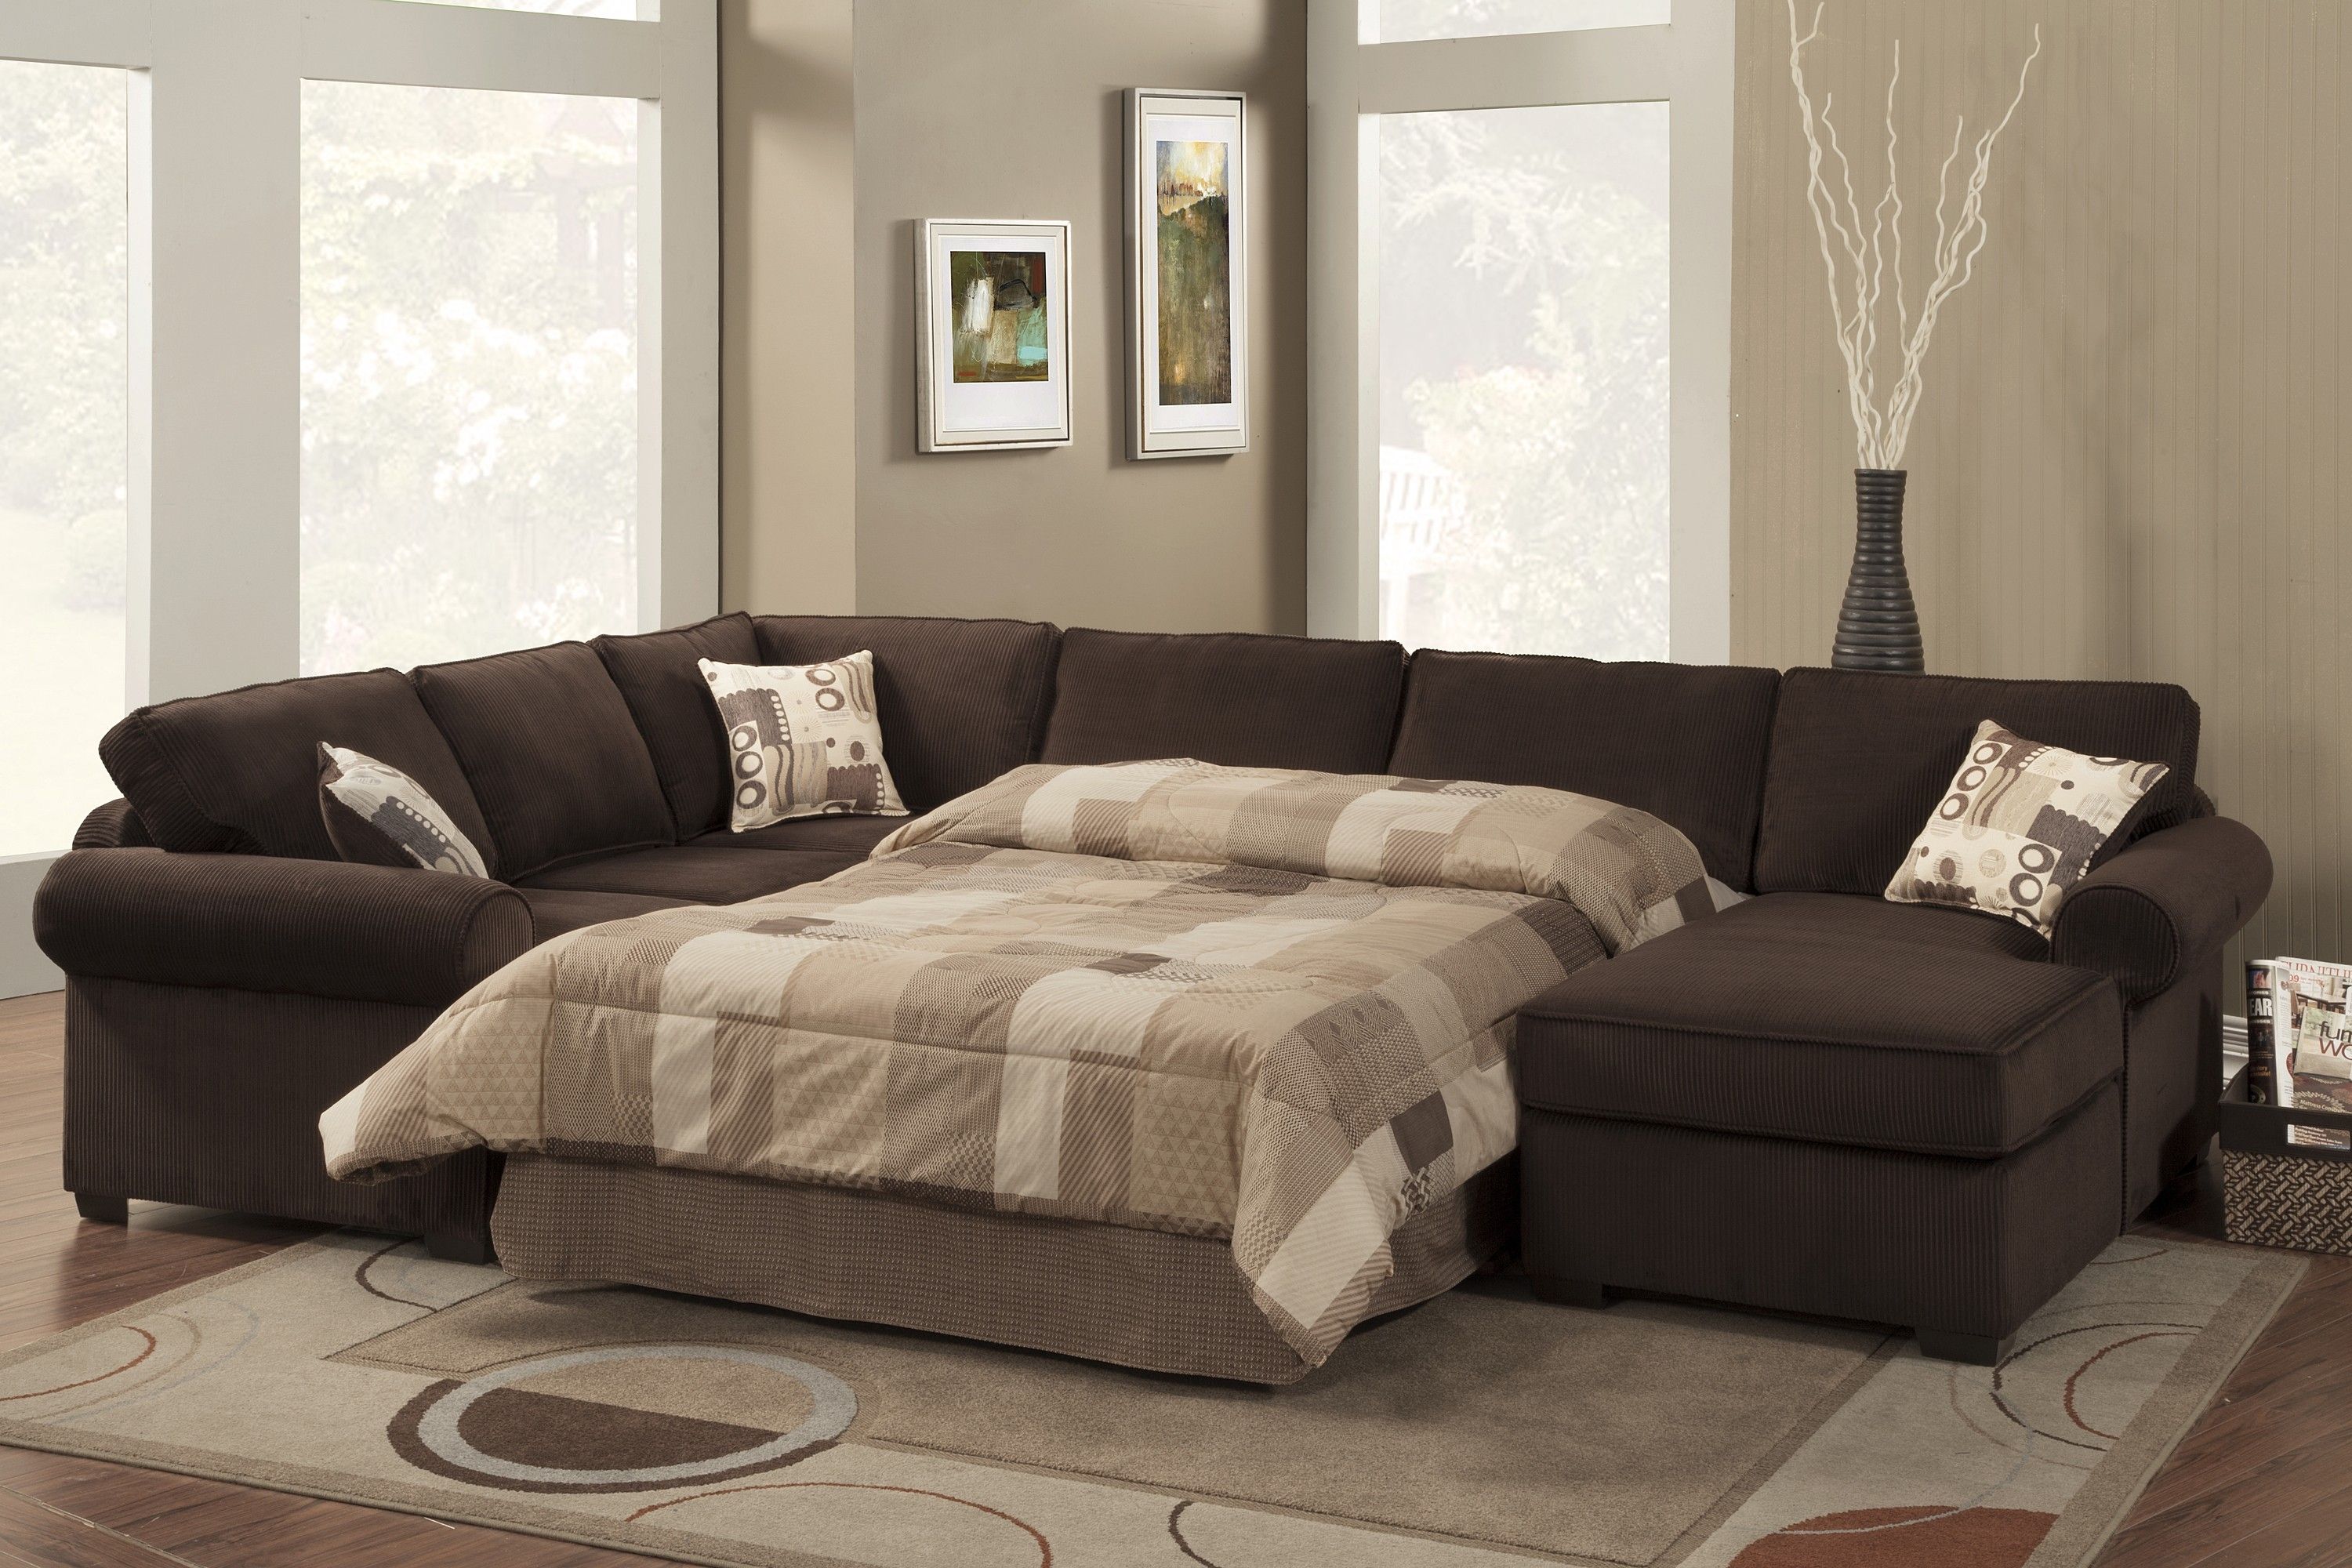 3 piece sectional sofa bed